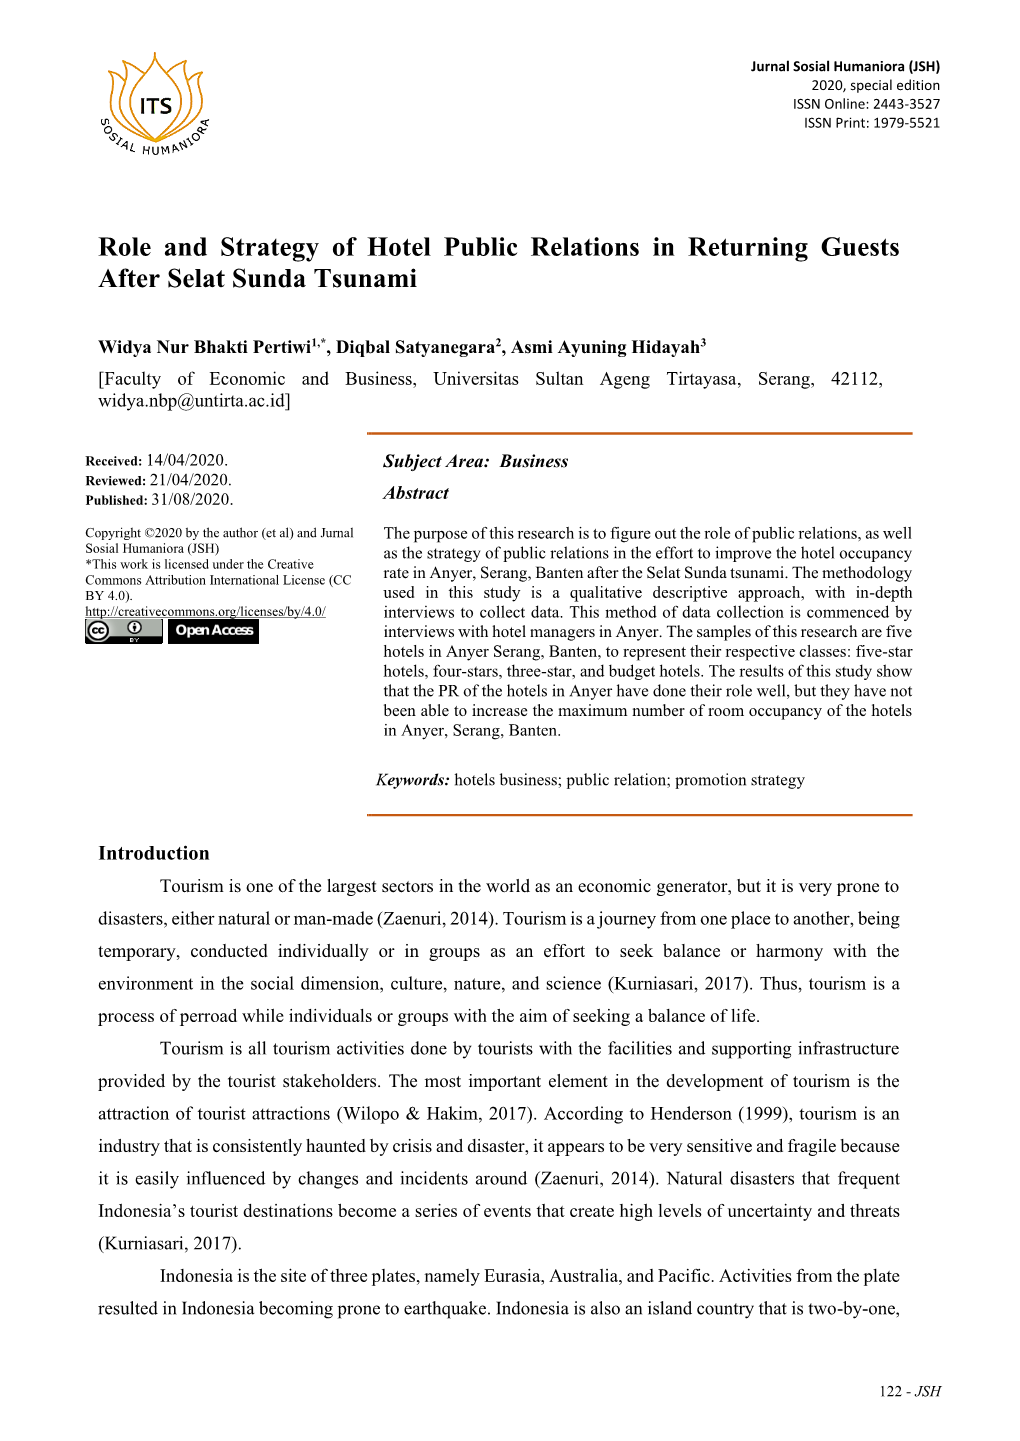 Role and Strategy of Hotel Public Relations in Returning Guests After Selat Sunda Tsunami